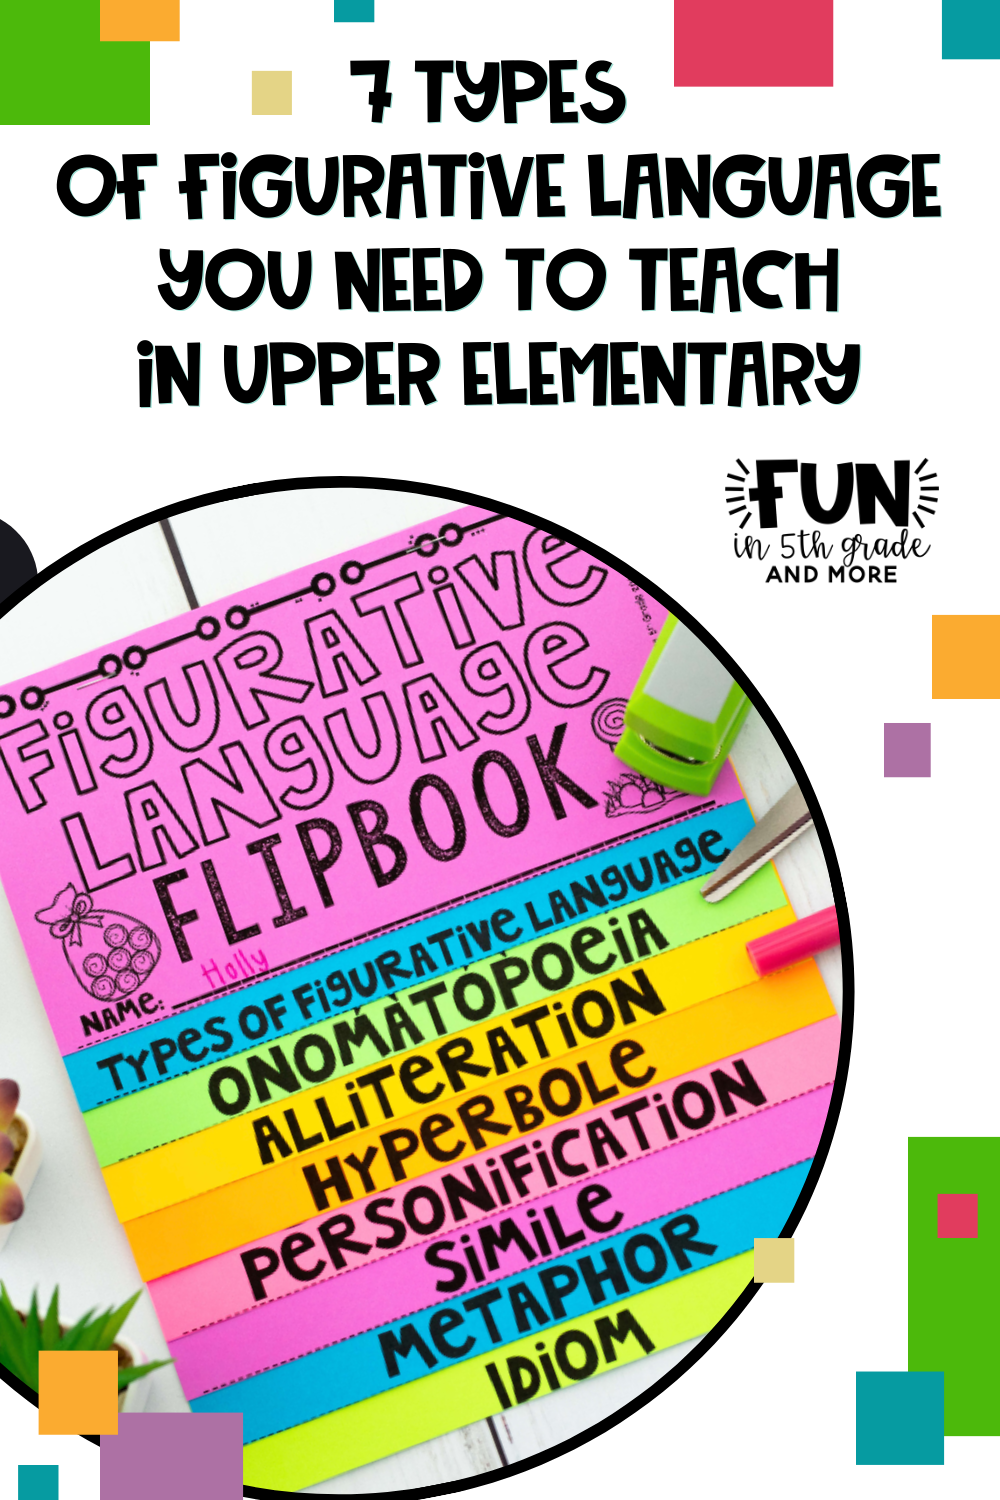 7 Types of Figurative Language you Need to Teach in Upper Elementary (Pinterest Pin)